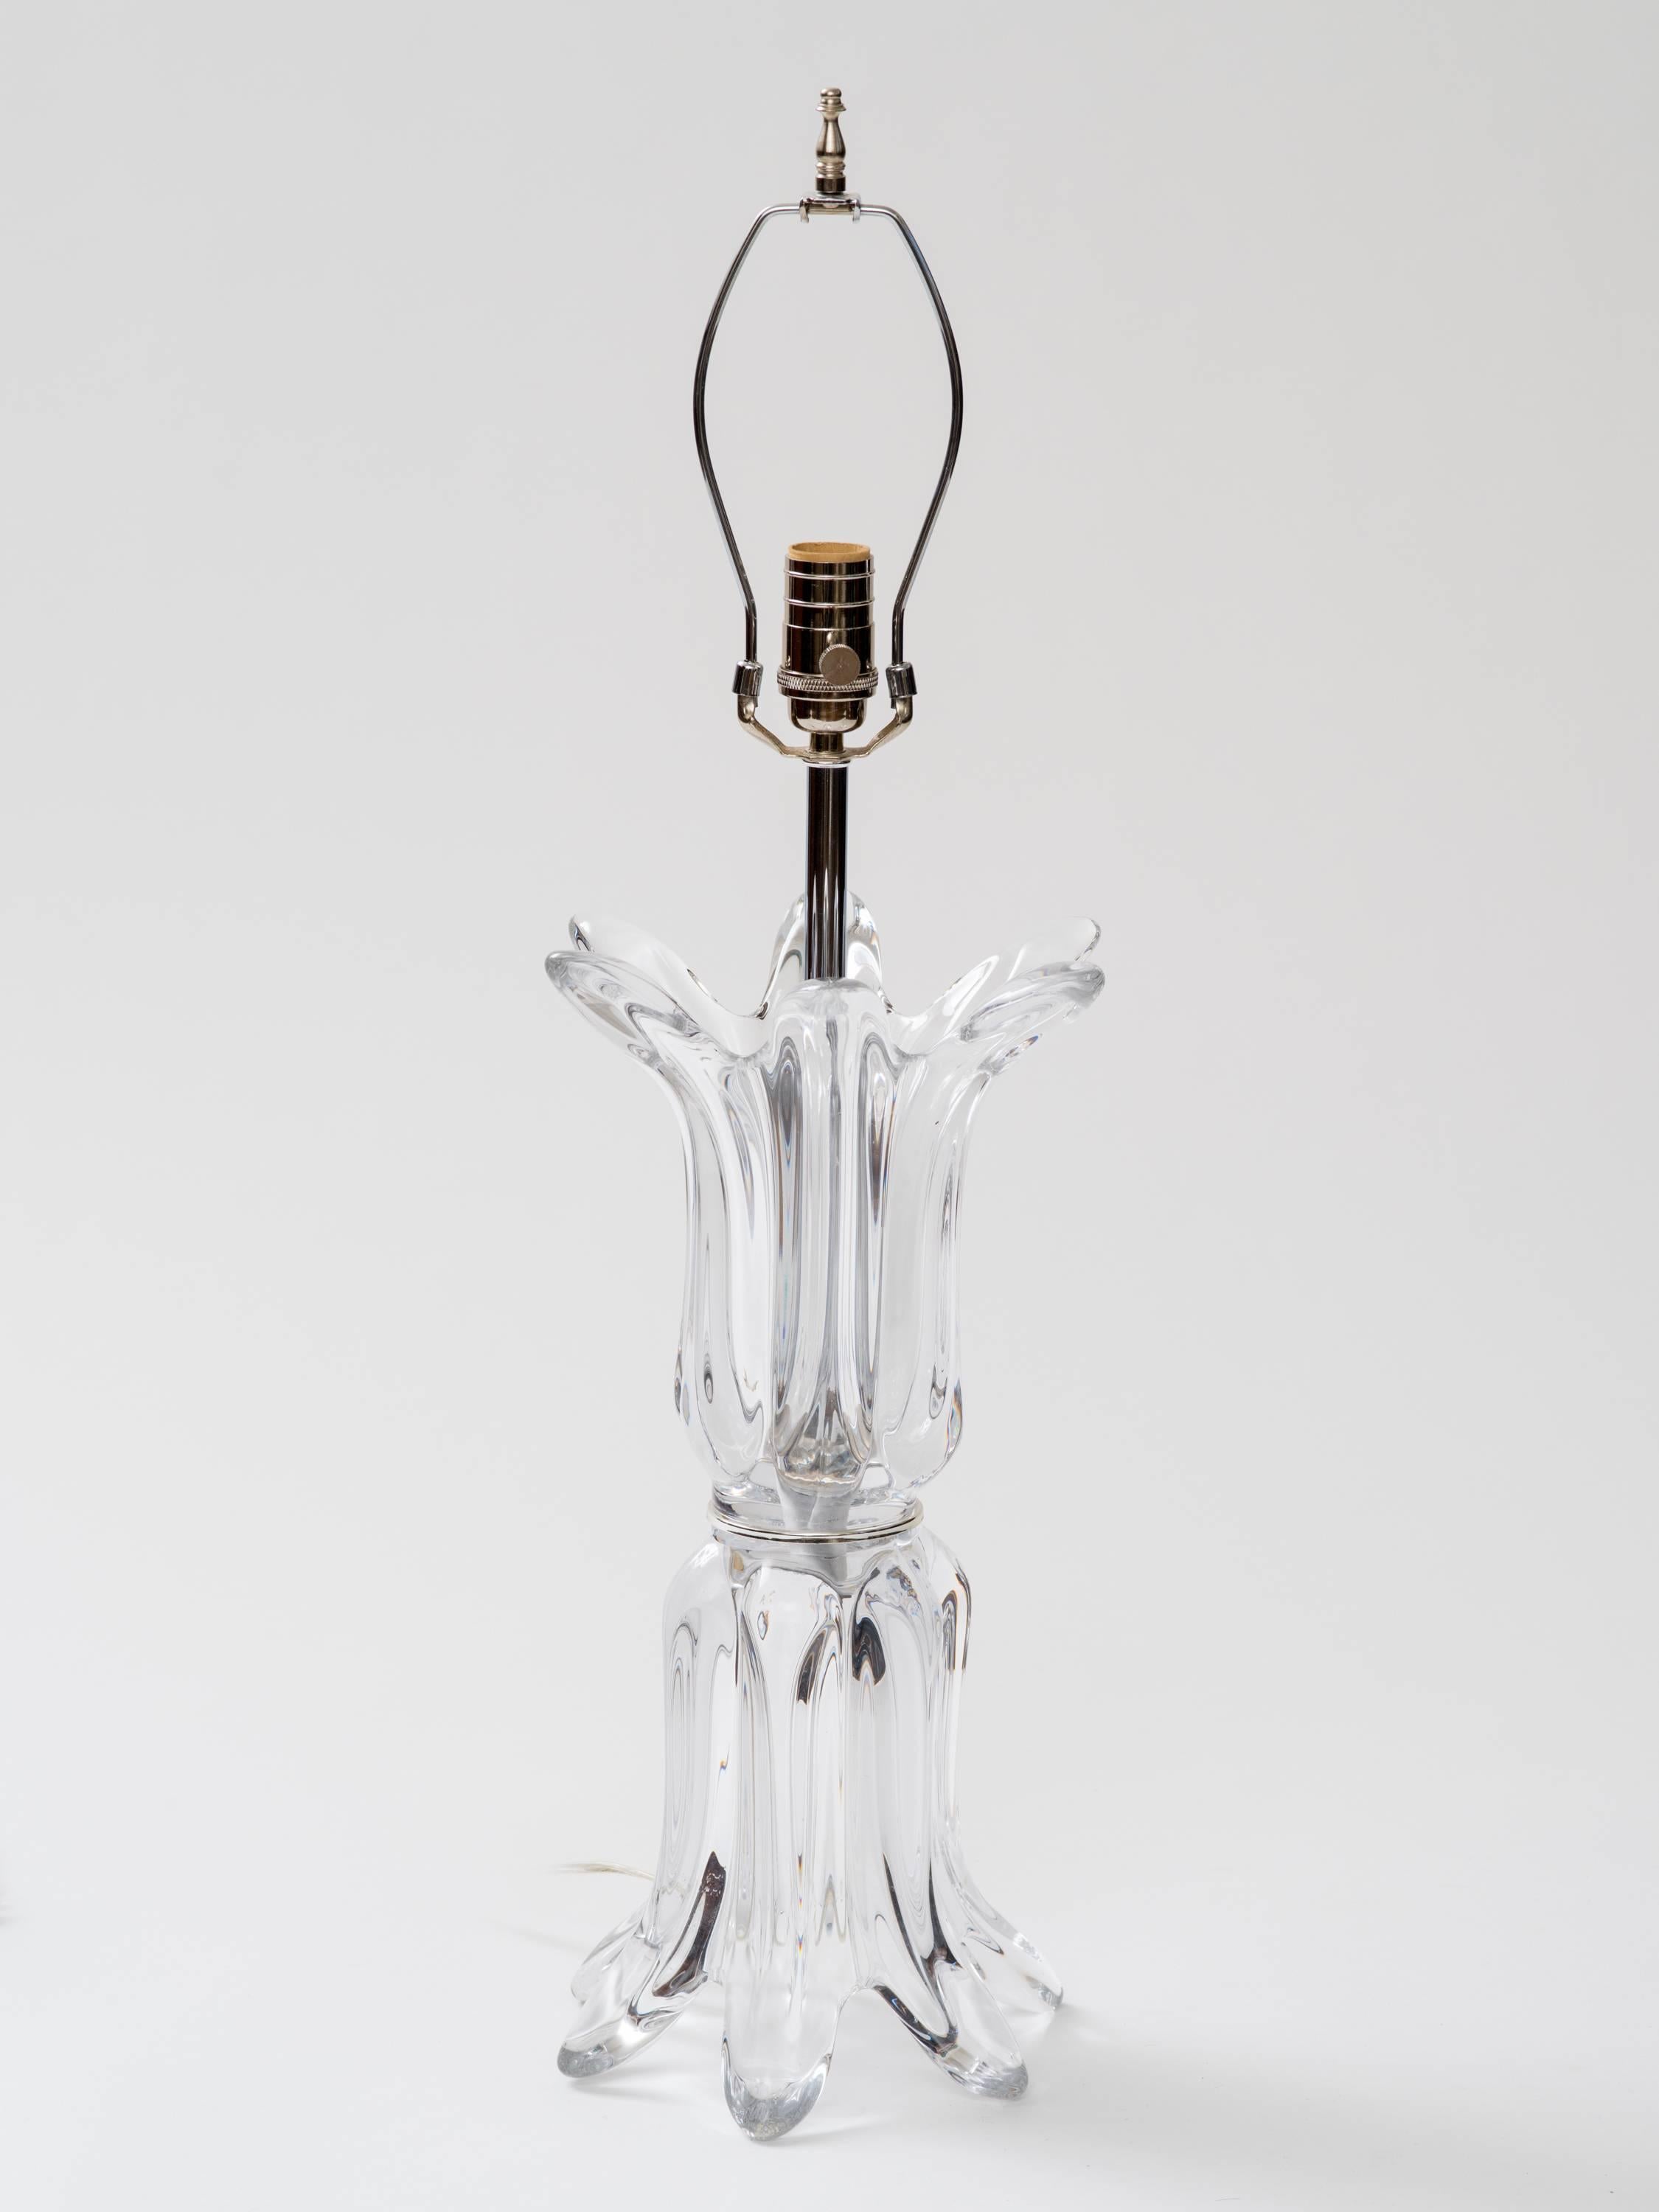 Hand blown clear Murano glass sculpture lamp with newly restored nickel-plated solid brass hardware, single socket, 100 watts max, circa 1970s, Italy.